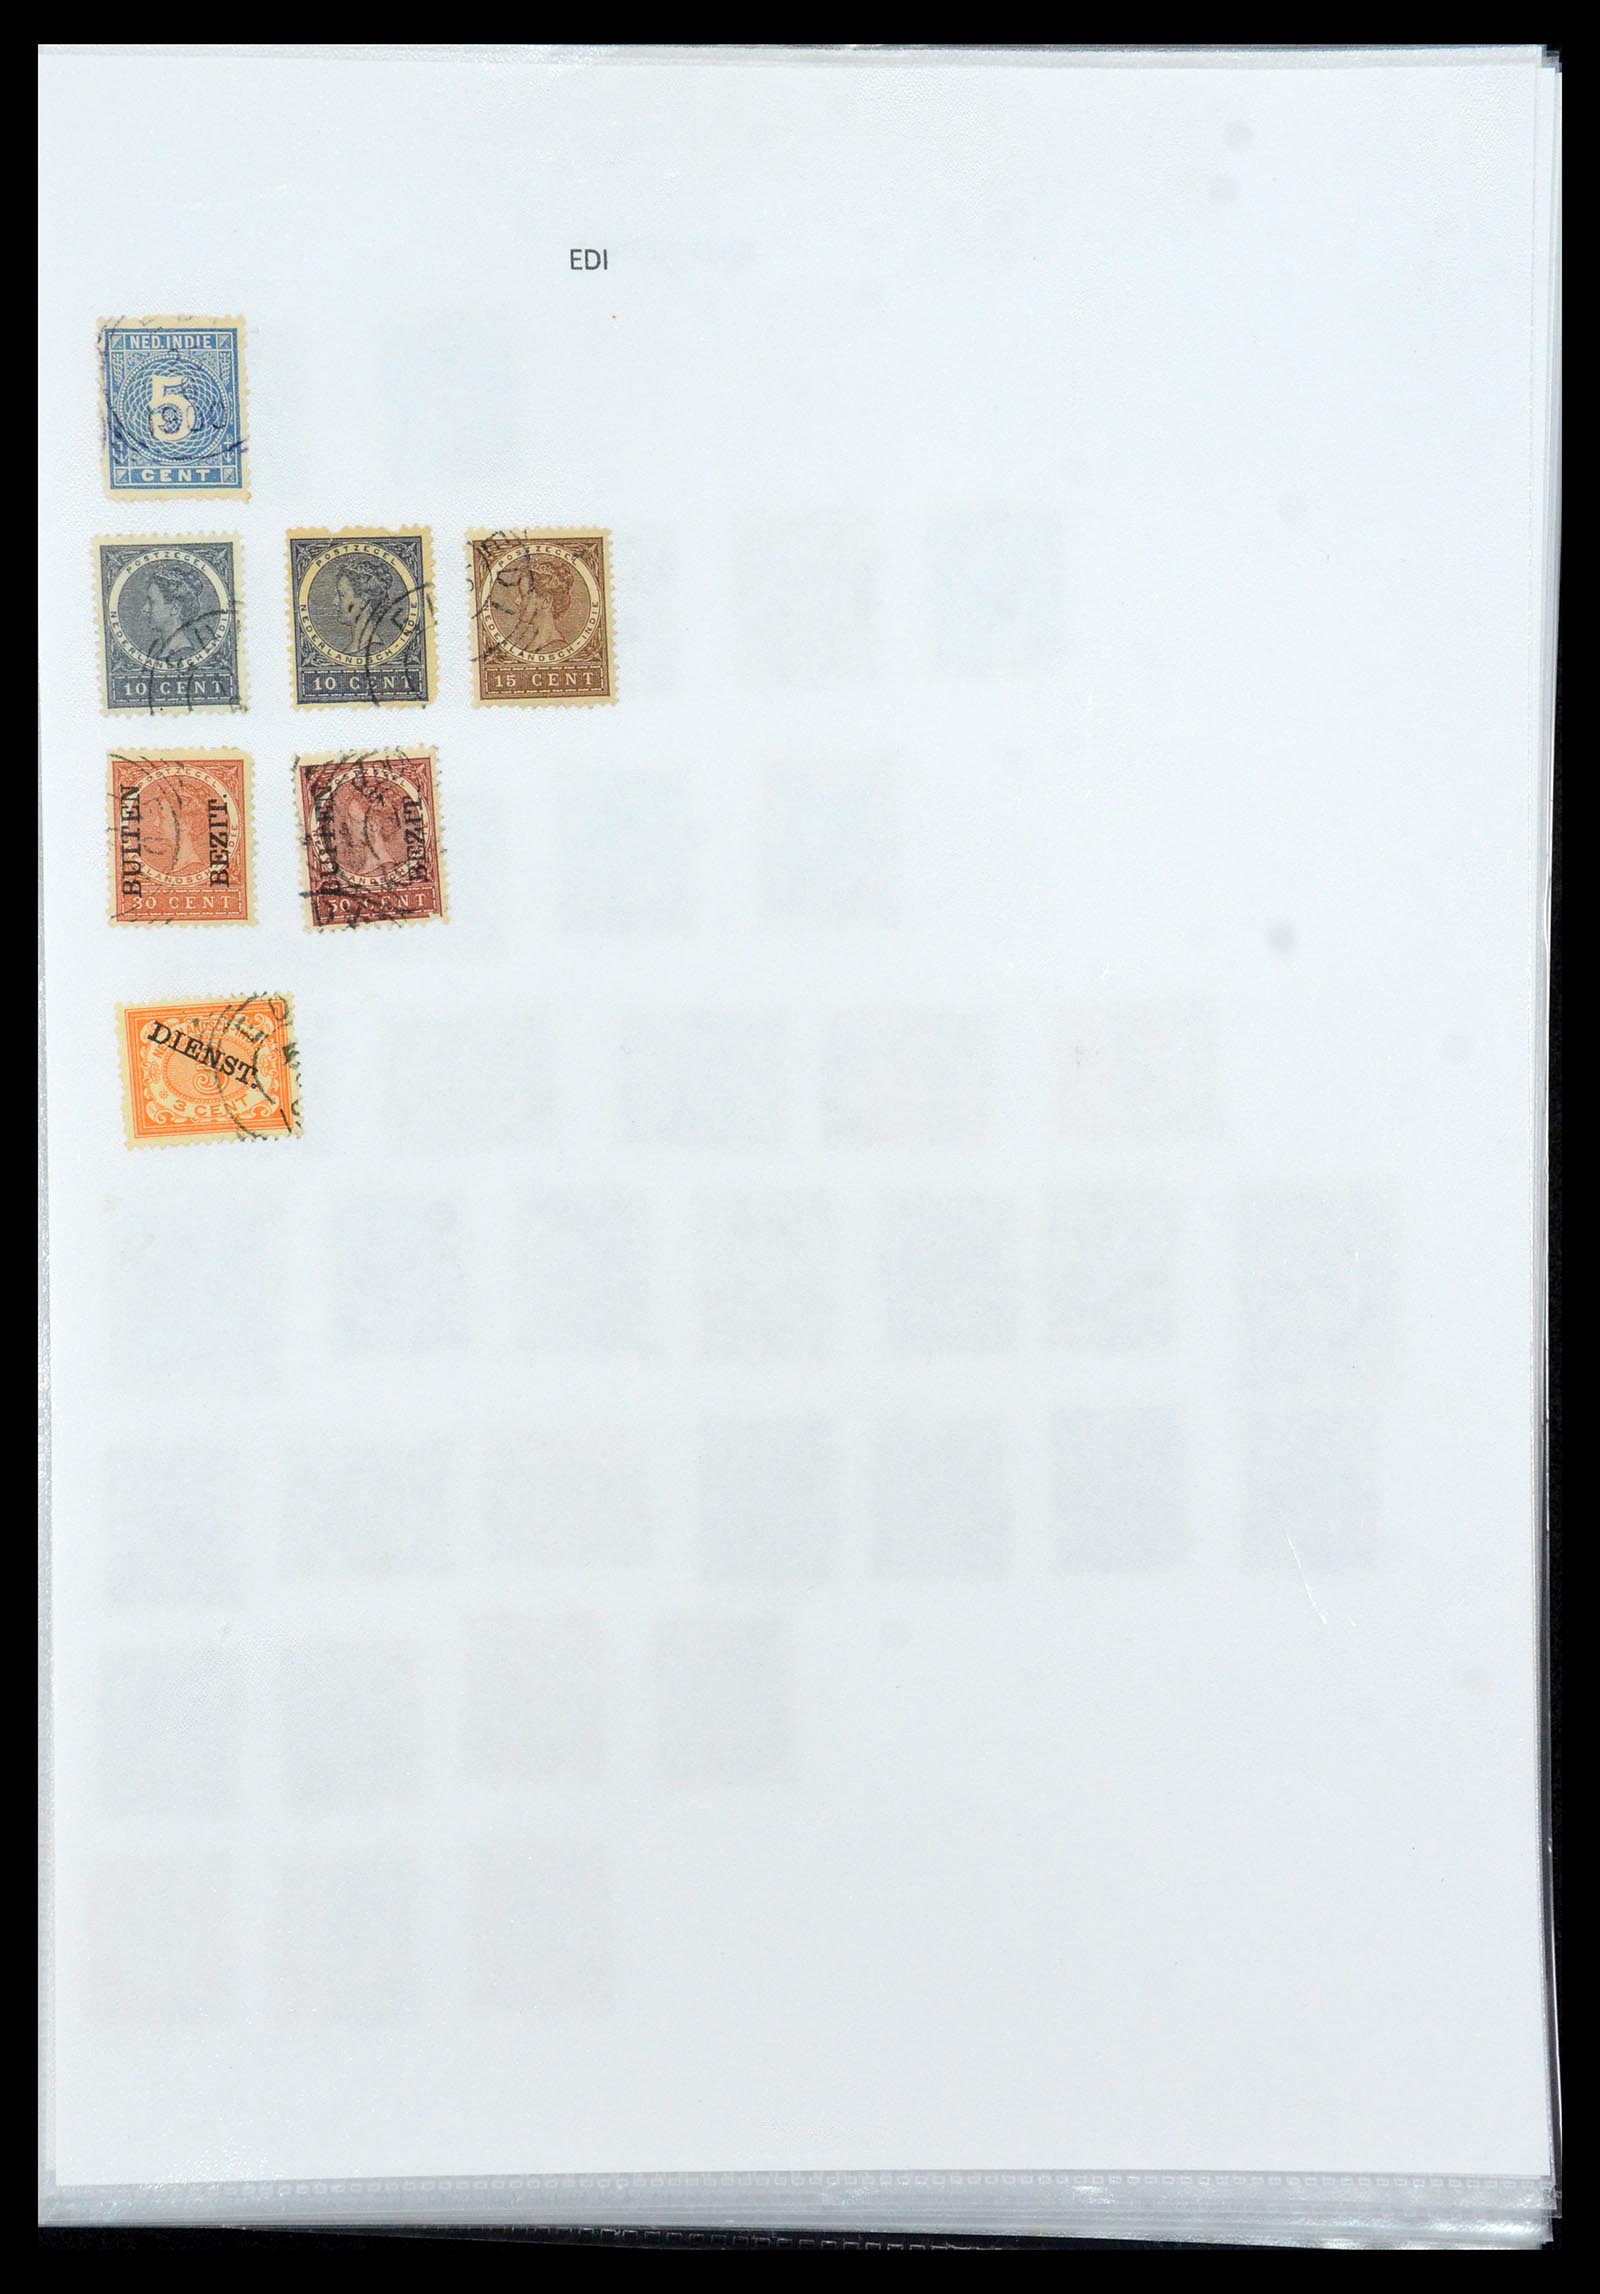 36432 051 - Stamp collection 36432 Dutch east Indies square cancels.